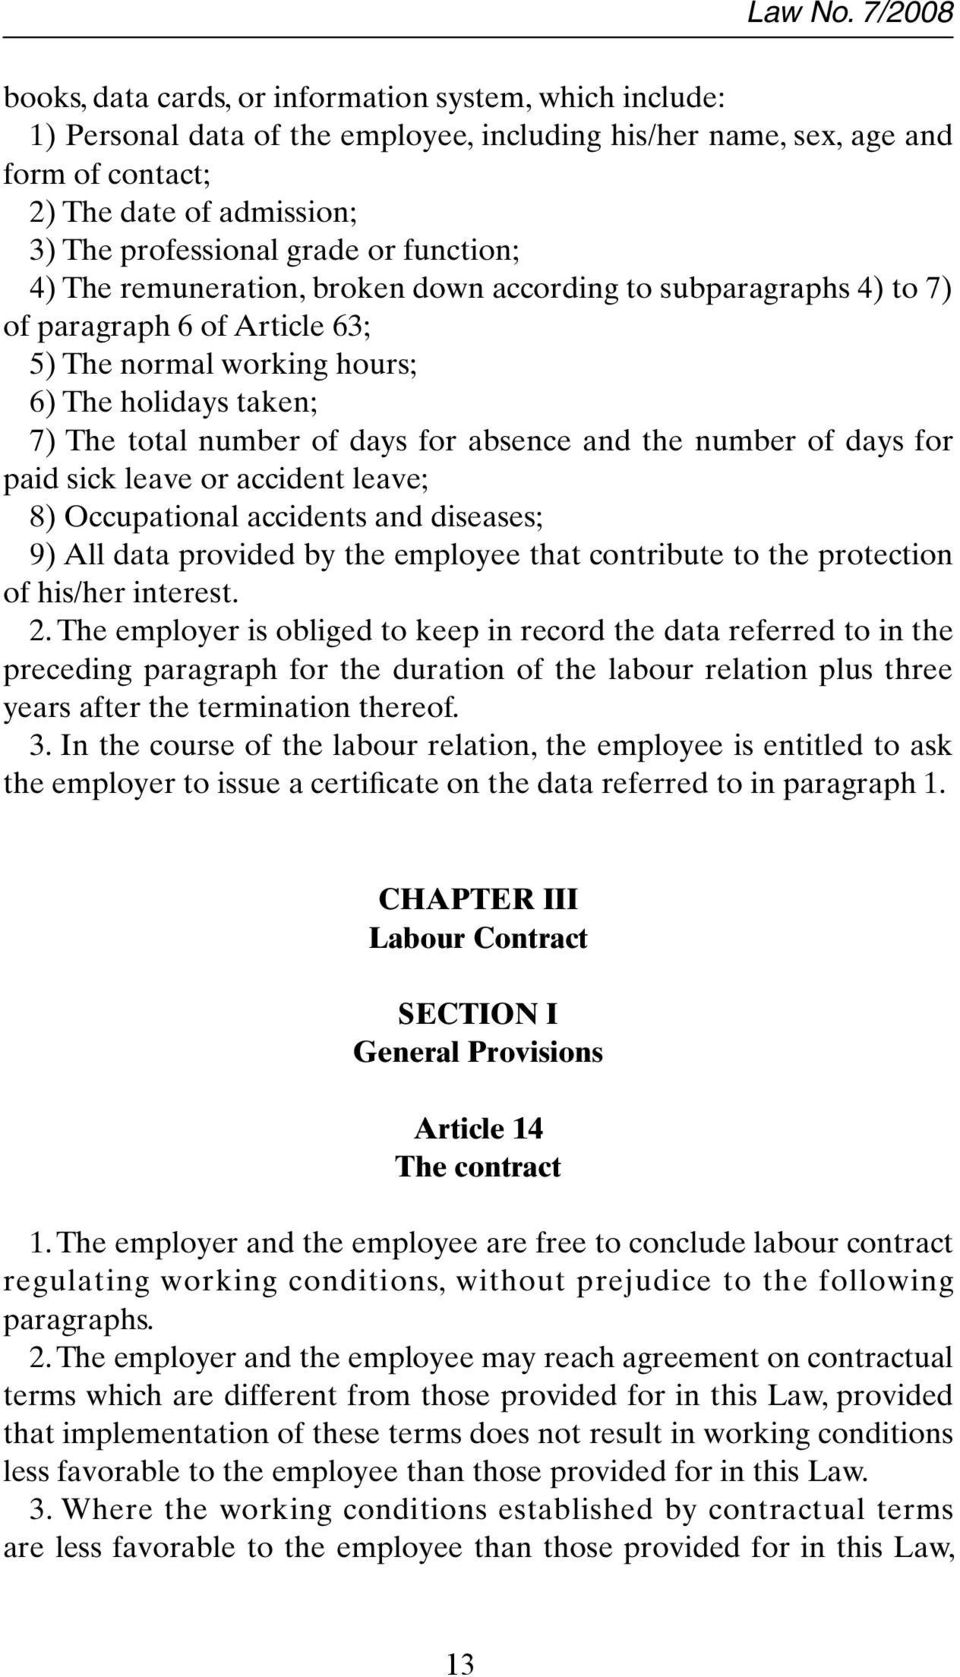 grade or function; 4) The remuneration, broken down according to subparagraphs 4) to 7) of paragraph 6 of Article 63; 5) The normal working hours; 6) The holidays taken; 7) The total number of days